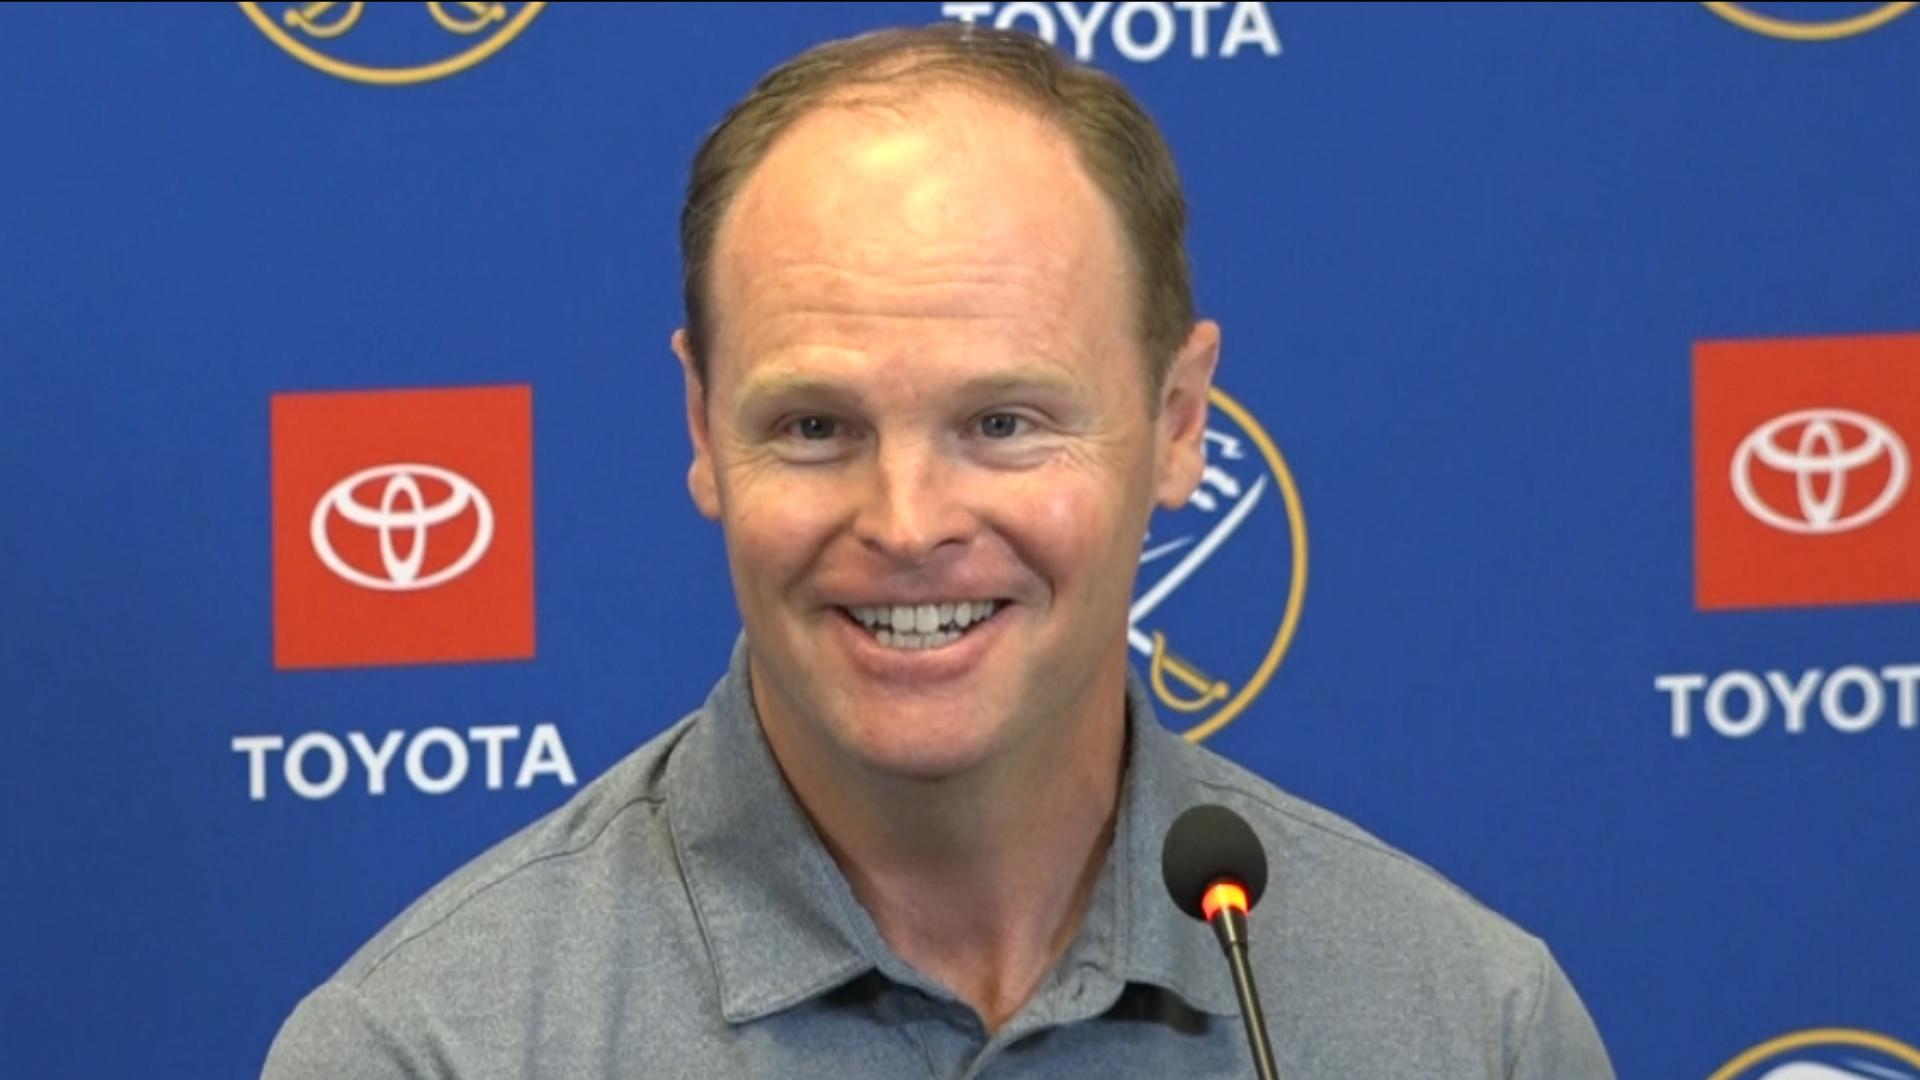 Sabres general manager Kevyn Adams held his pre-draft news conference on Thursday morning where he discussed several options for the team's 11th overall pick.